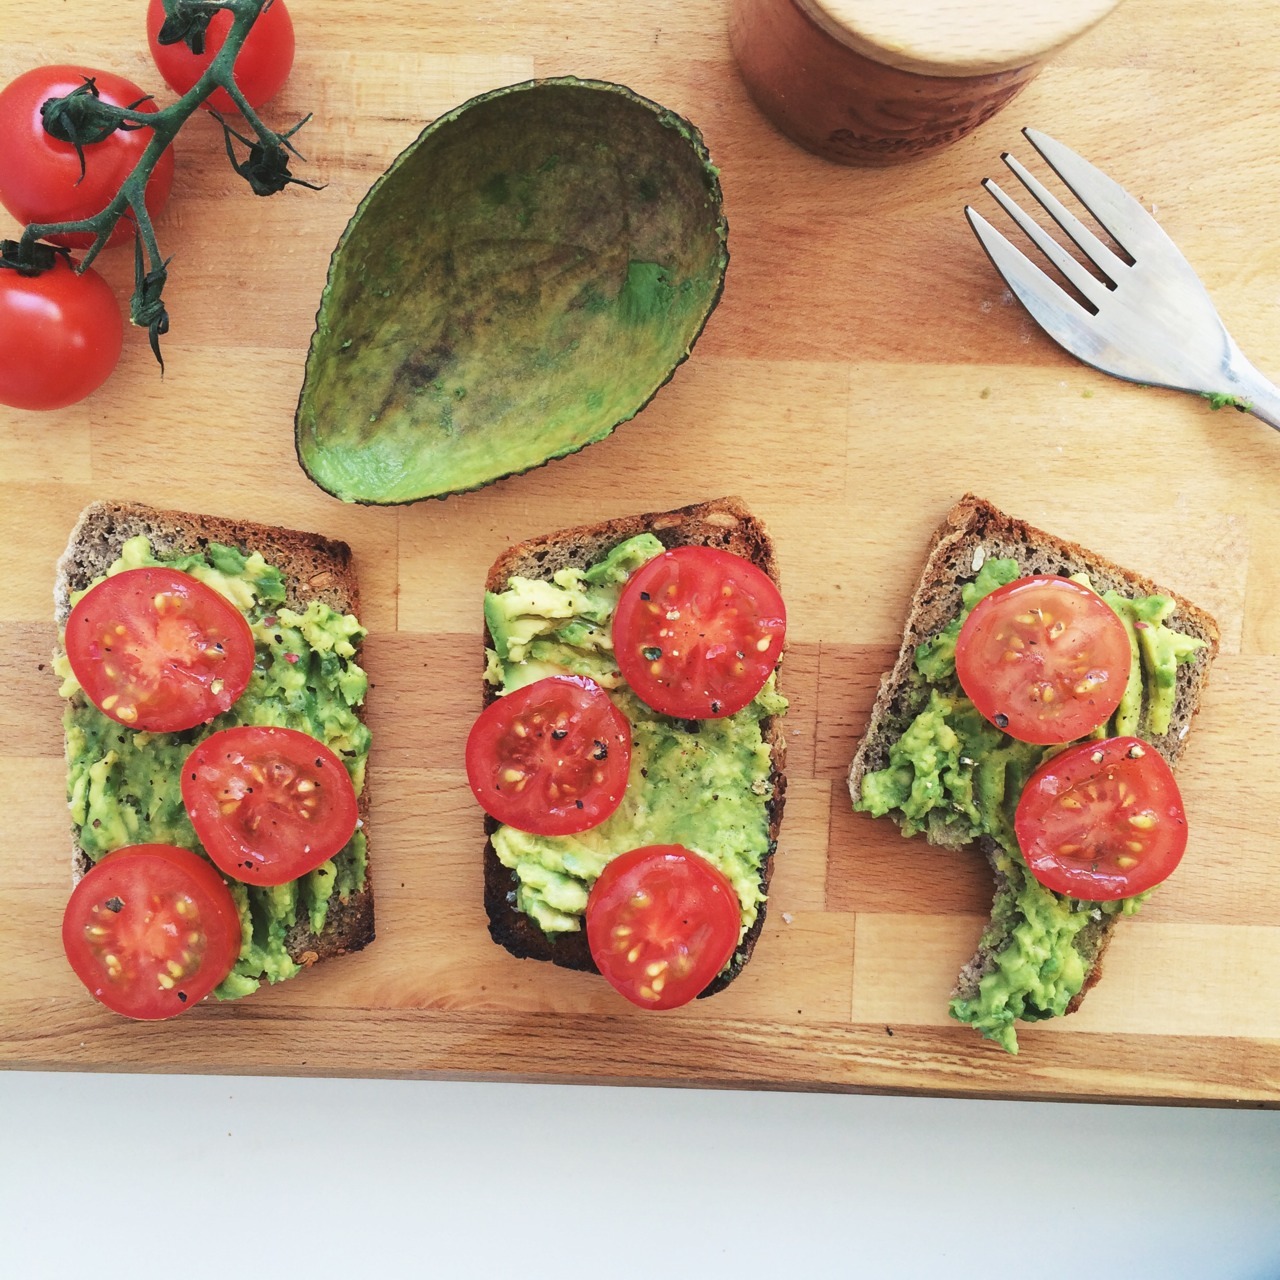 | My favourite study lunch: Toasted home baked...